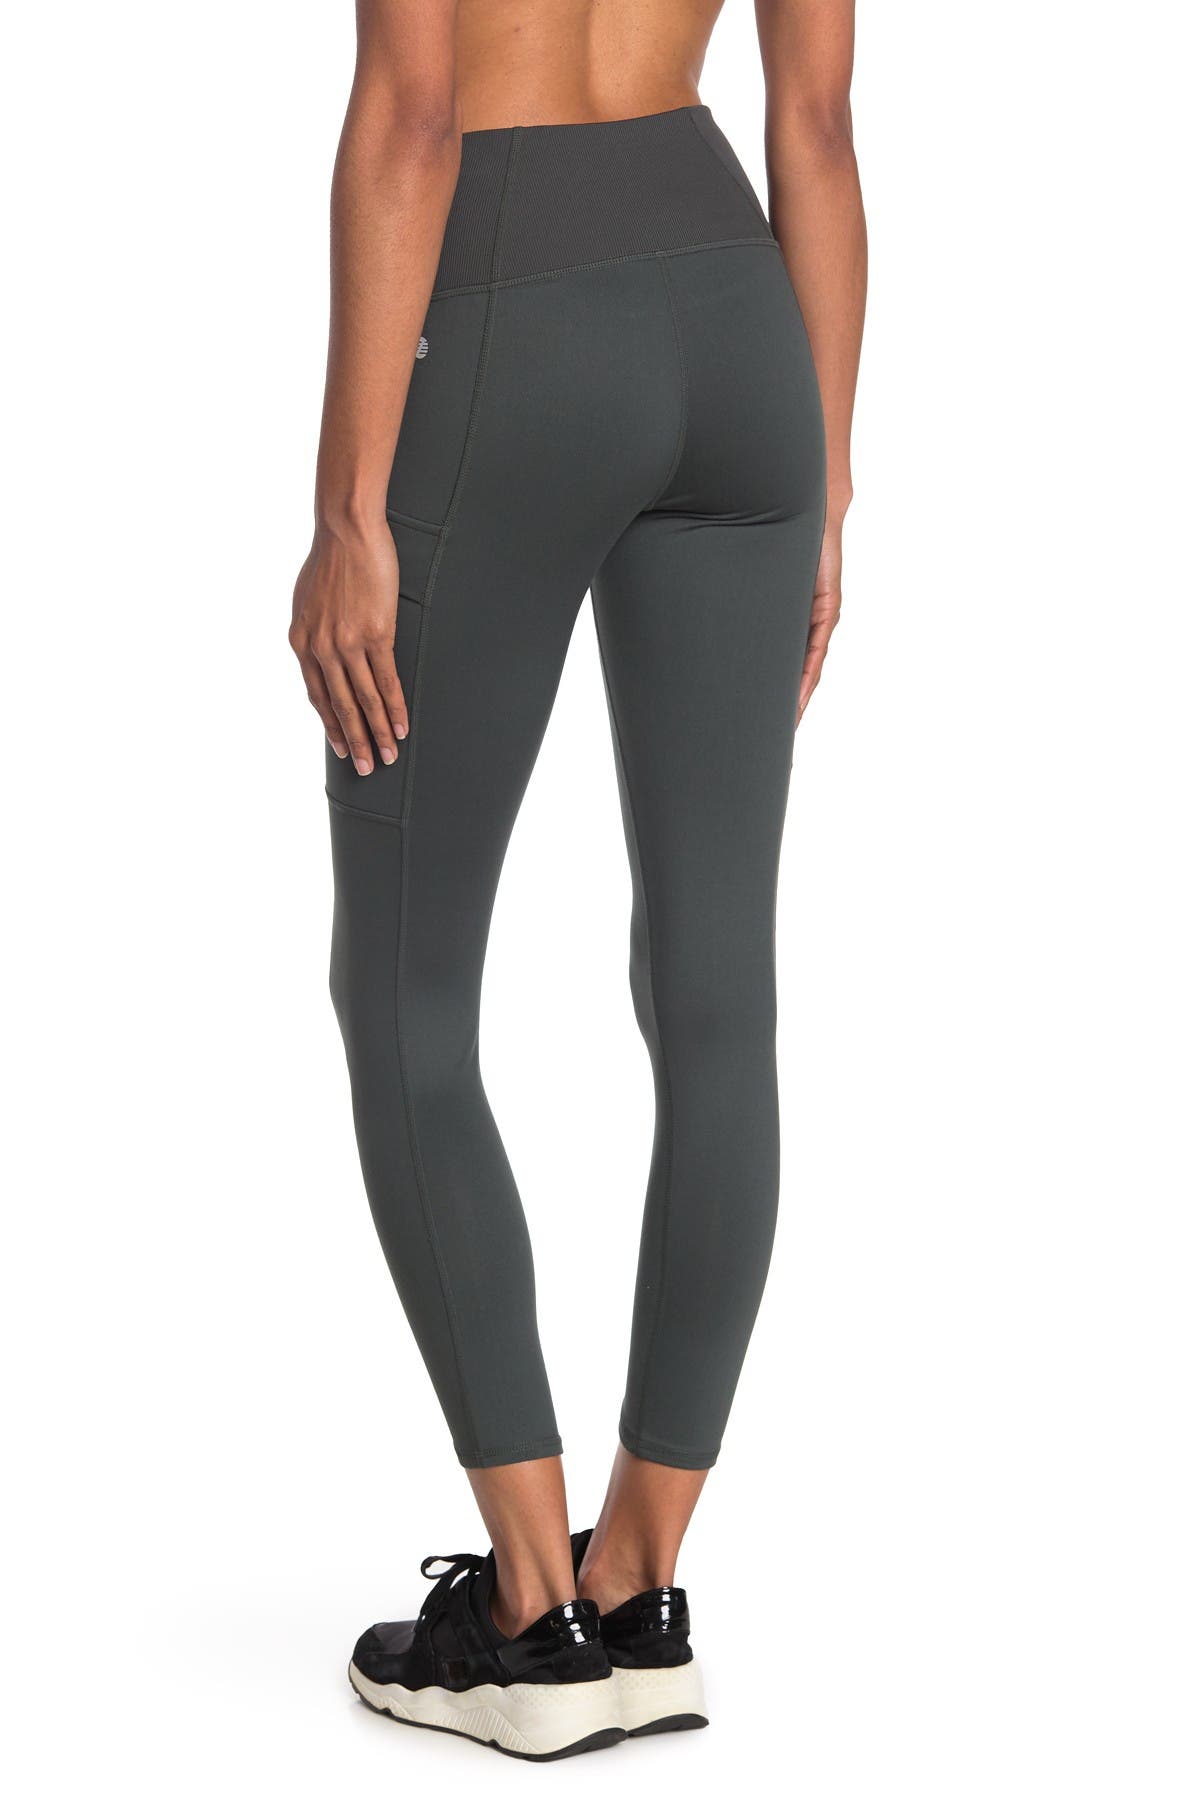 Best Z By Zella Leggings For Women Over 60  International Society of  Precision Agriculture